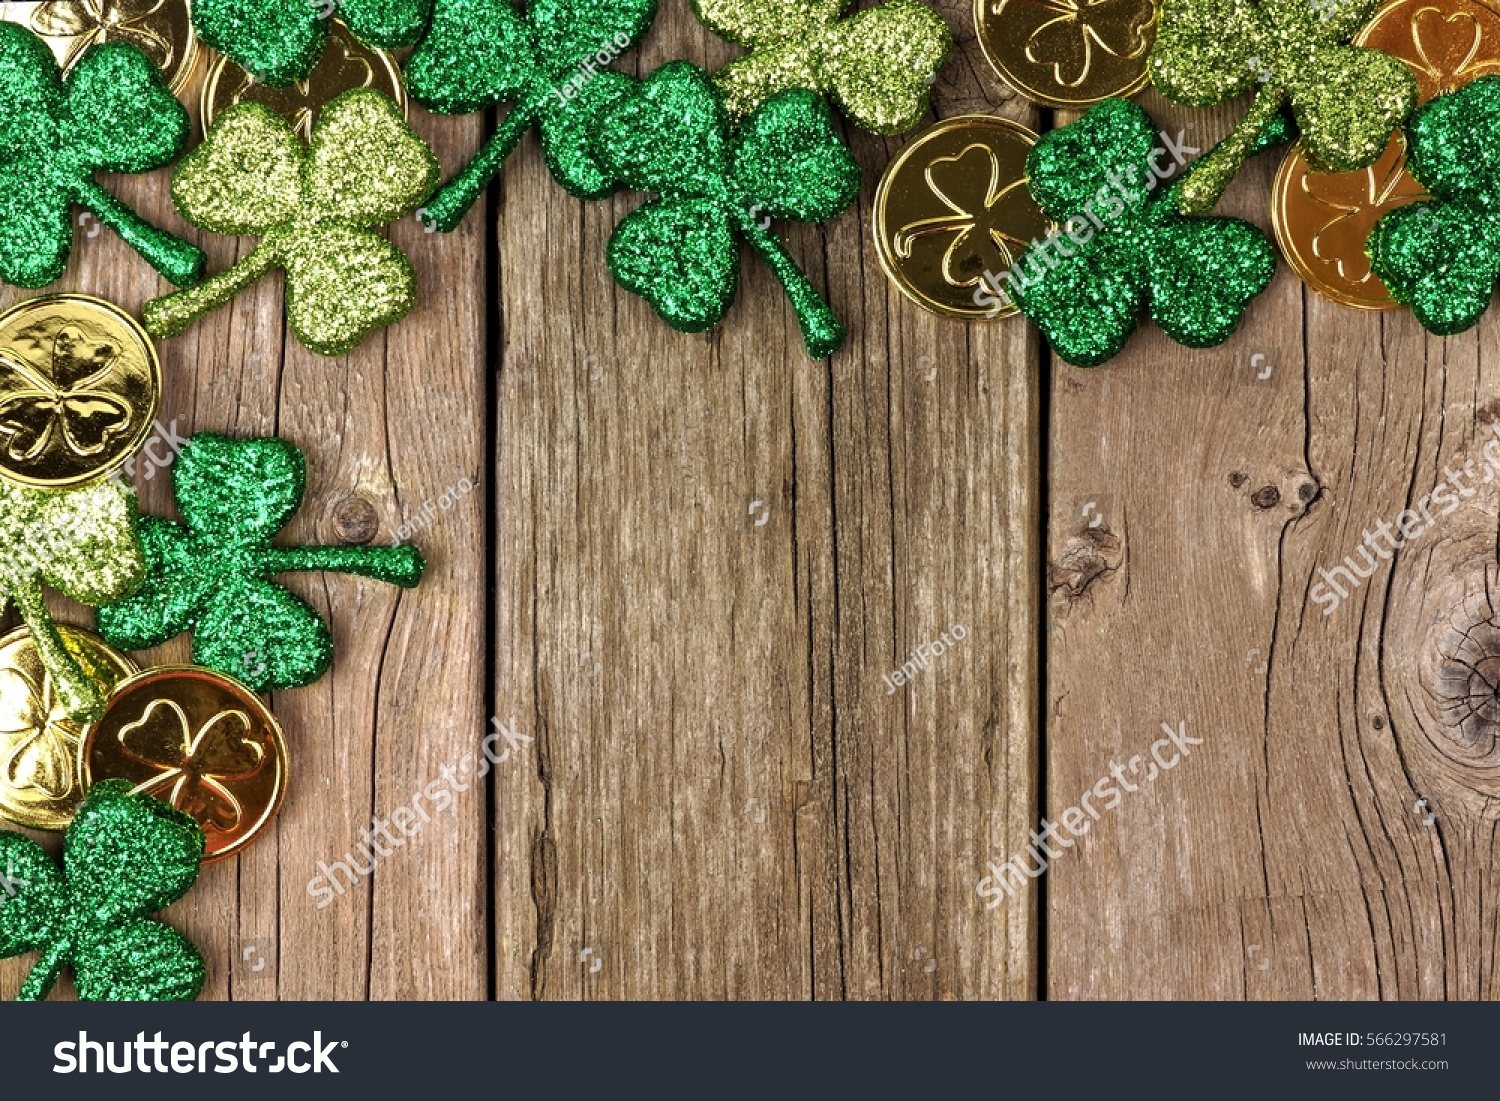 St Patricks Day corner border of shamrocks and gold coins over a rustic wood background #566297581